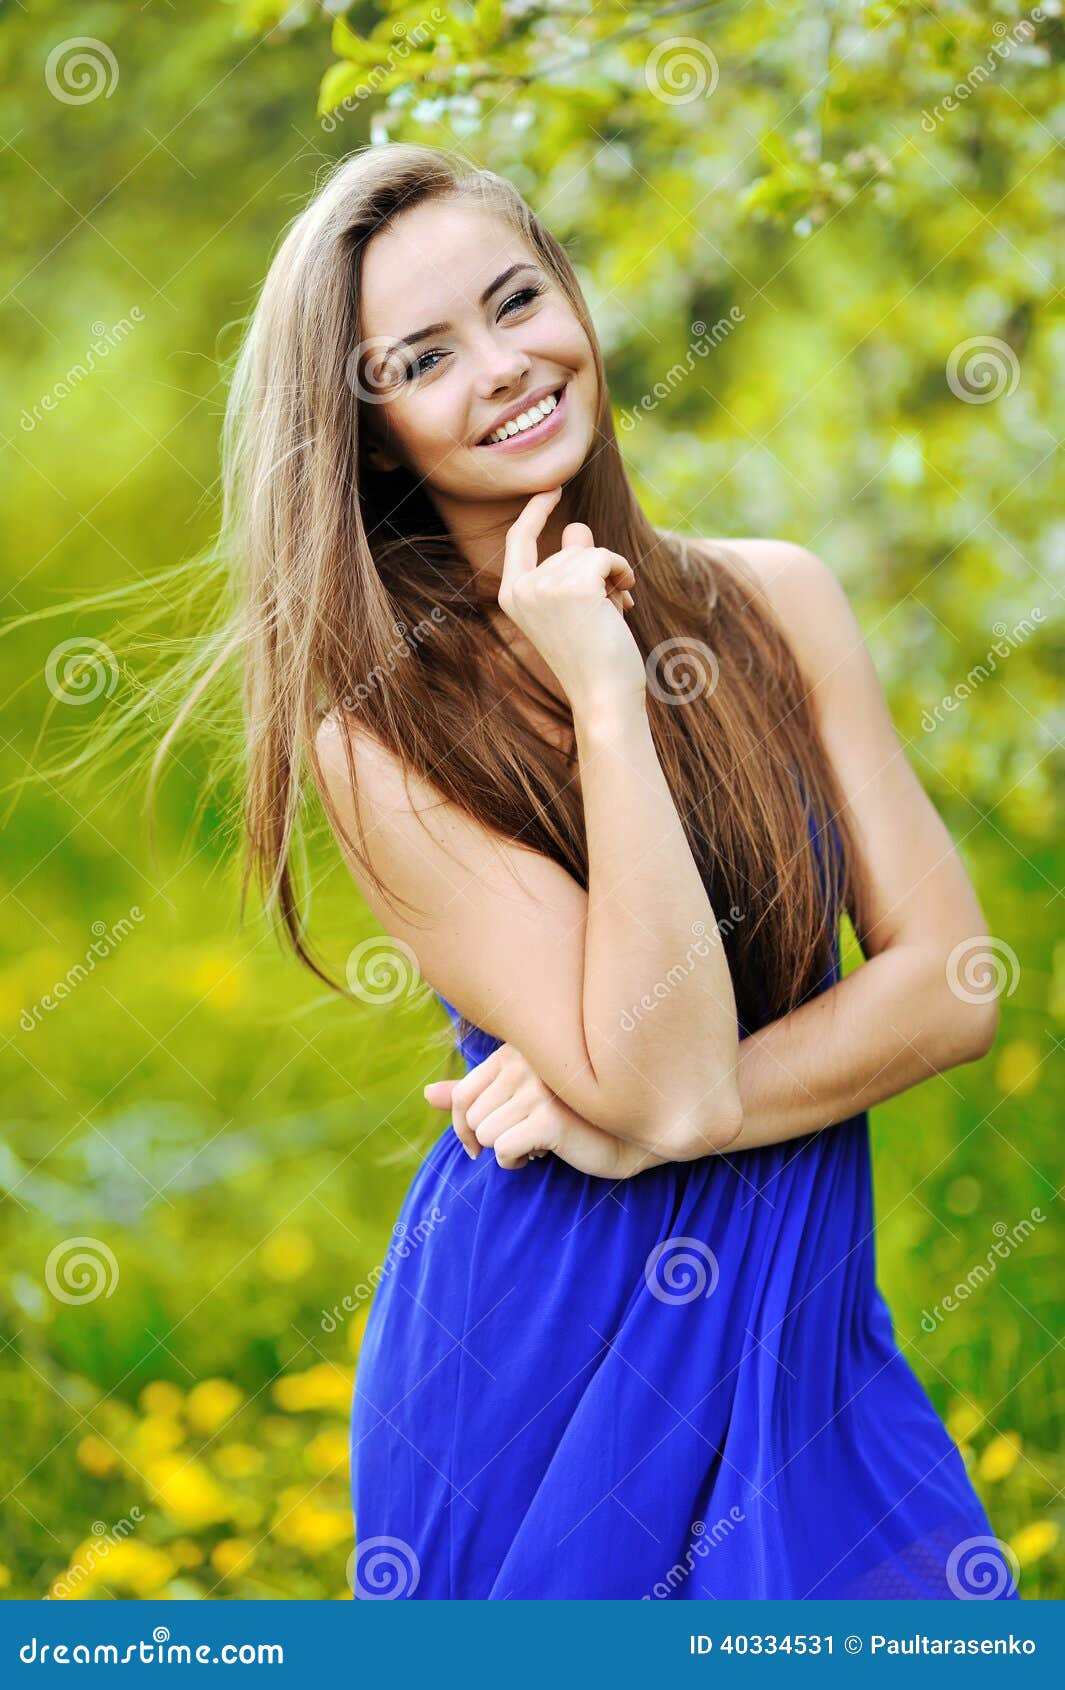 Young Cheerful Woman Posing in a Green Park Stock Image - Image of ...